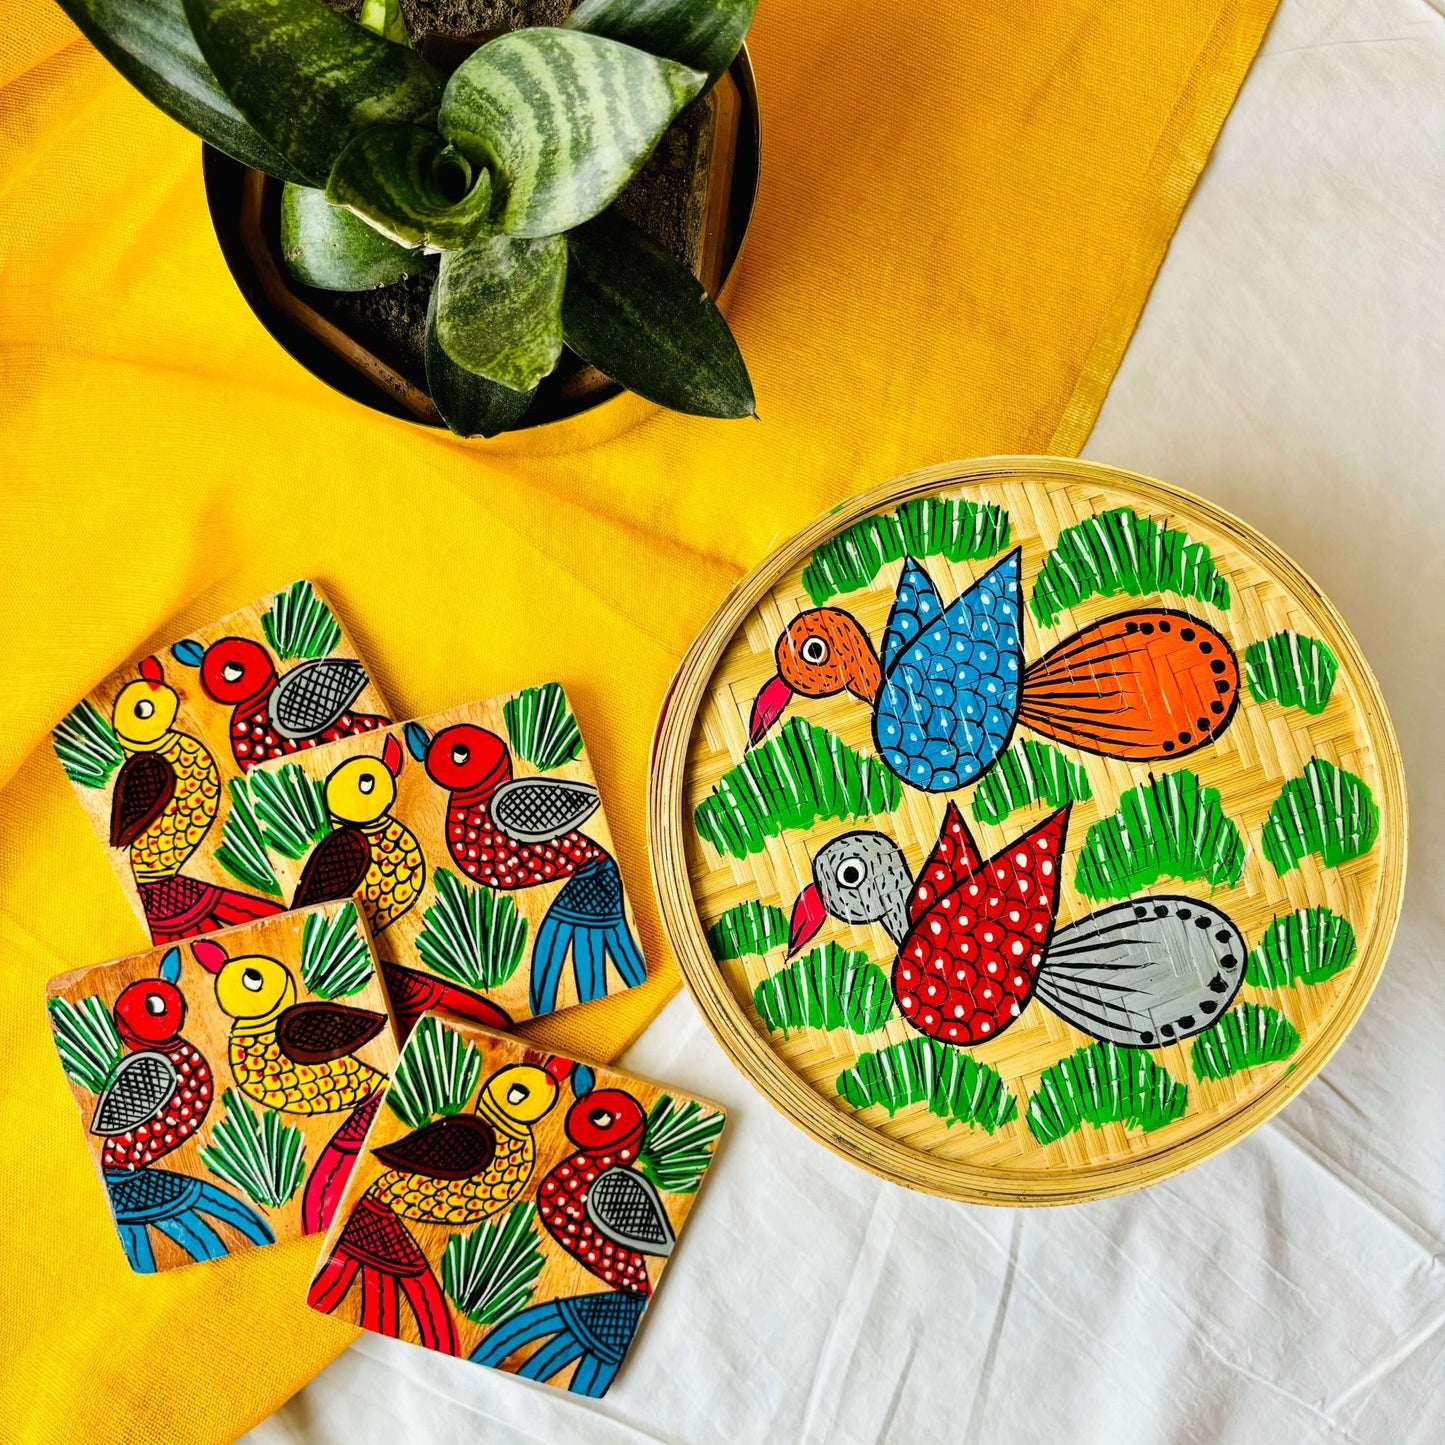 One handwoven bamboo fruit box with a motif of two birds flying over a field and a set of four square wood coasters with a motif of one yellow and one red bird are displaced against a yellow background with a plant pot beside them